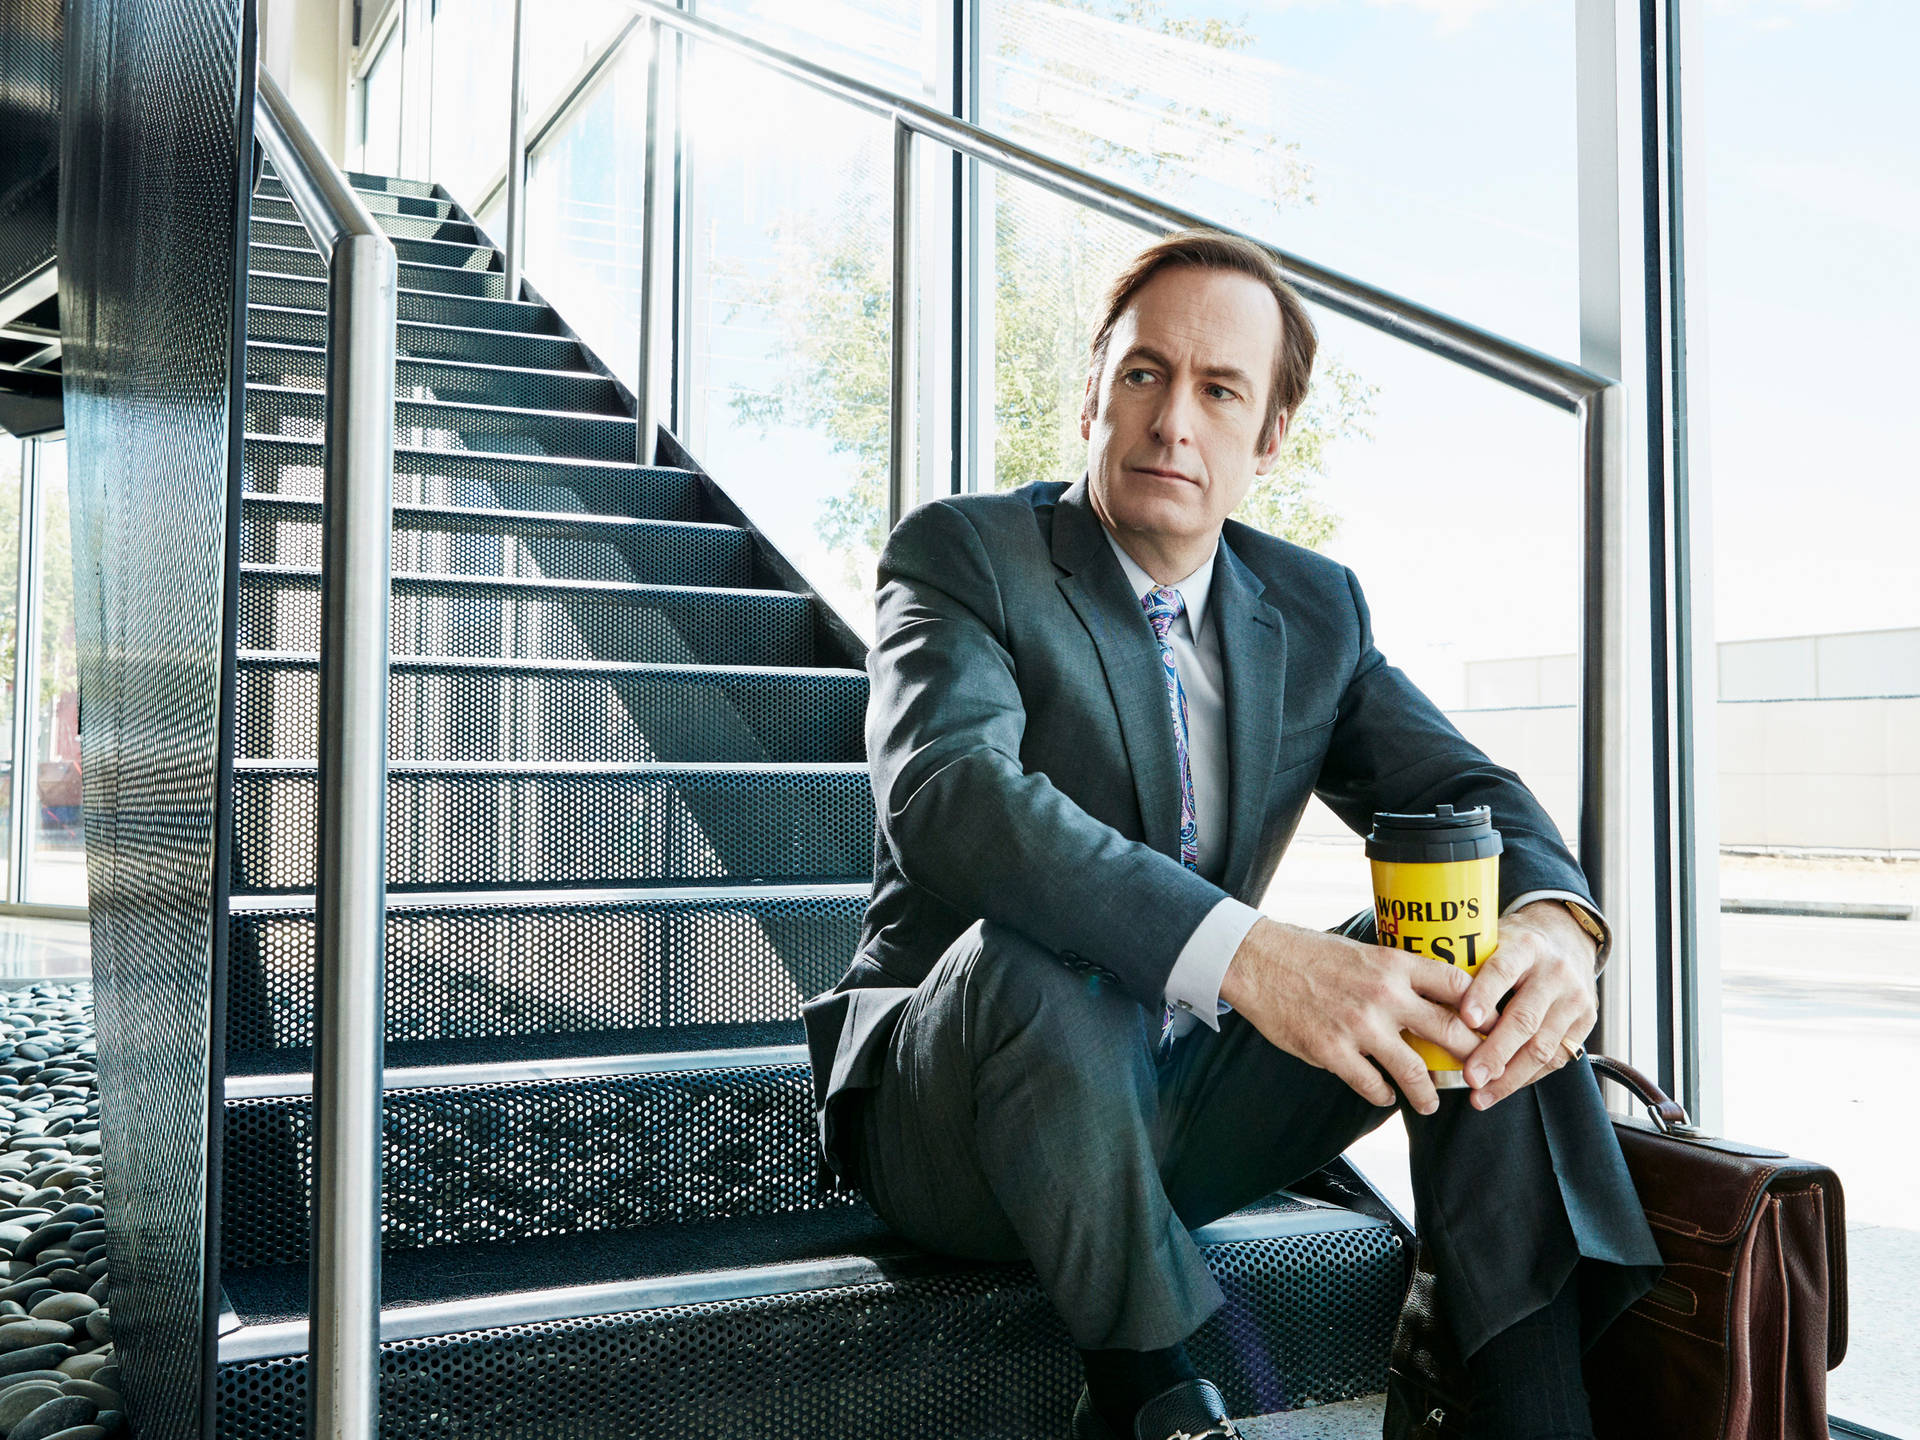 Jimmy Mcgill Descending A Staircase In Better Call Saul